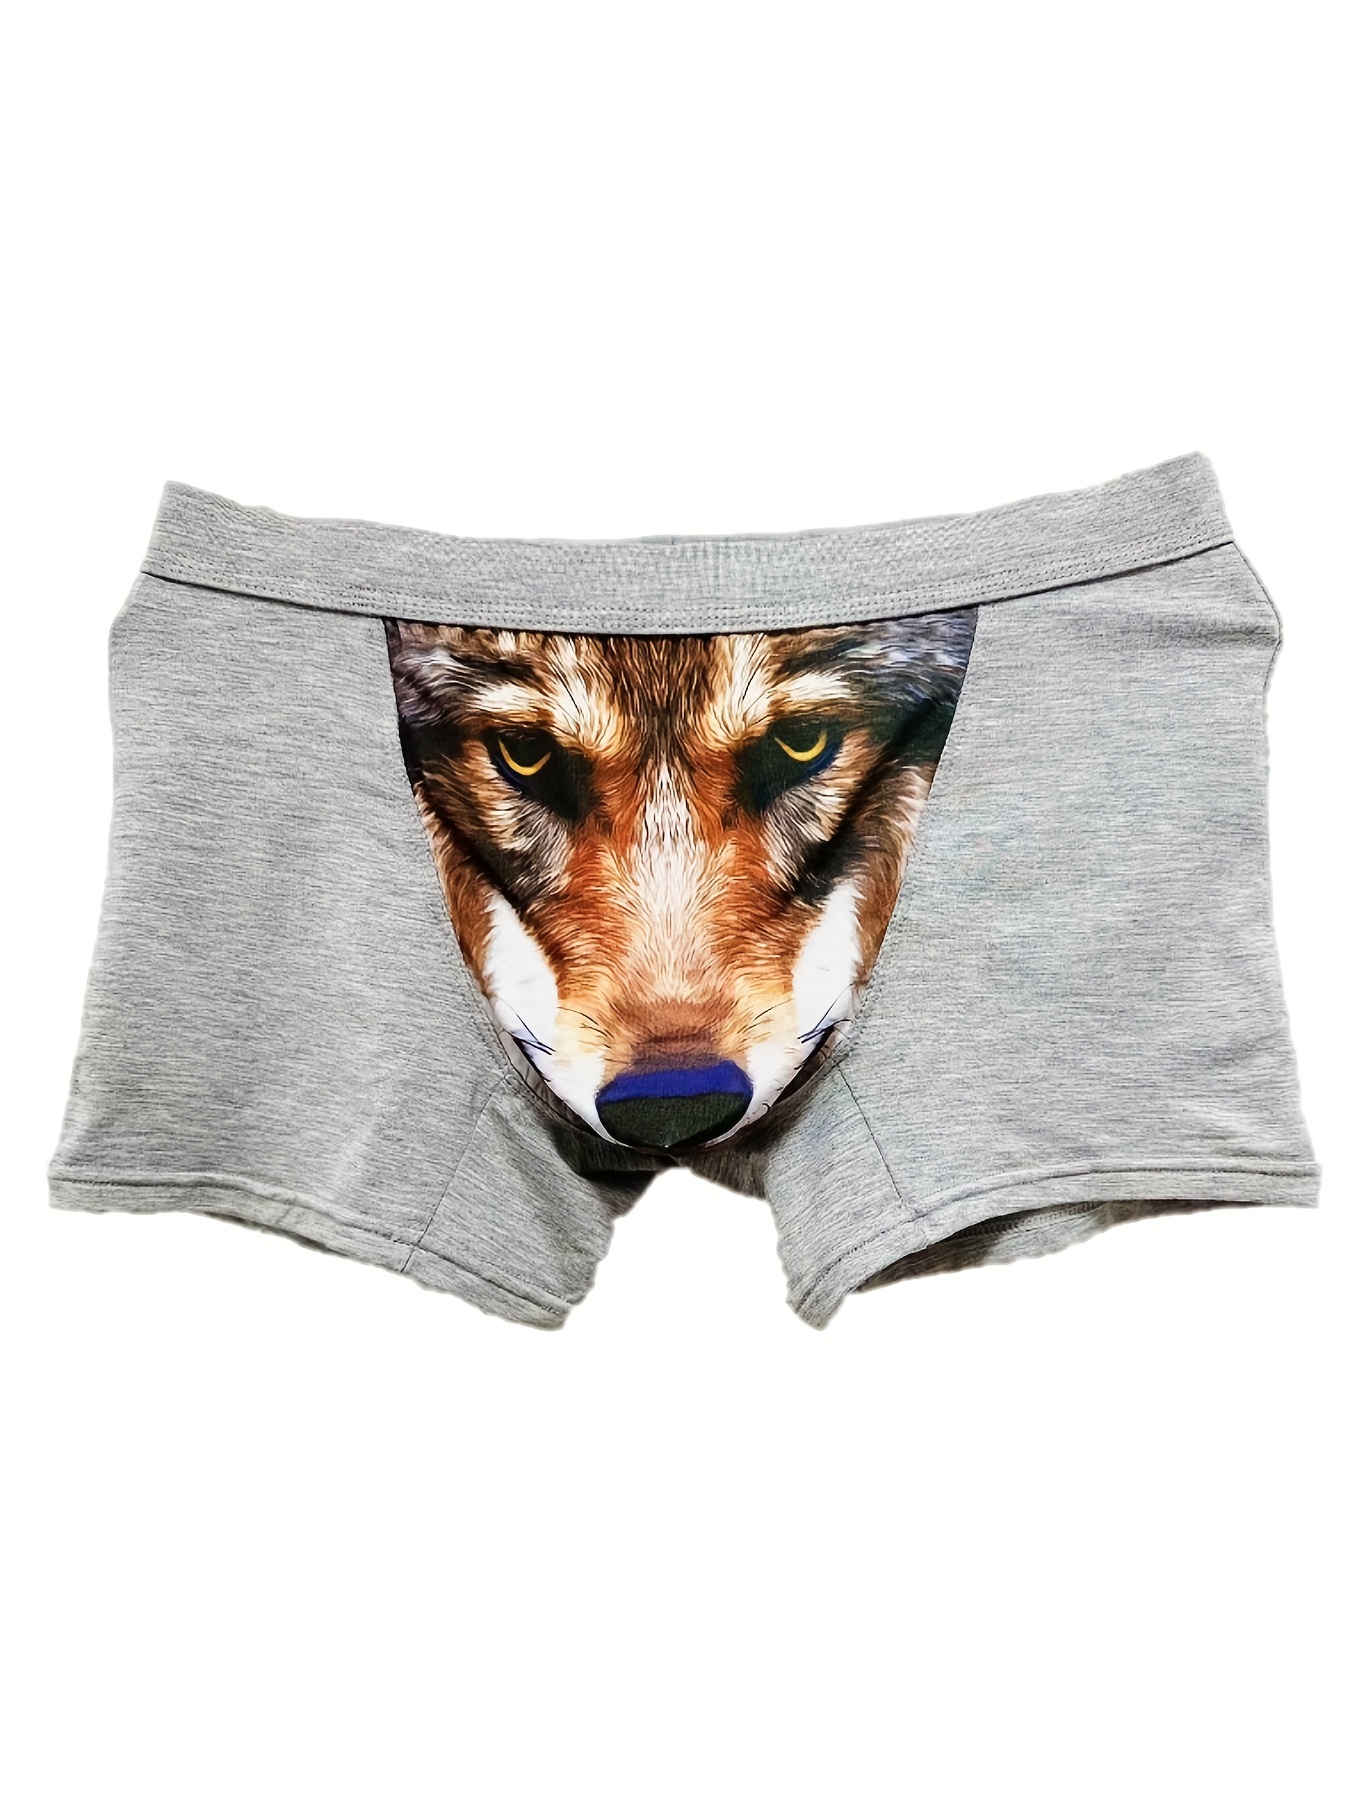 Mens My Dog Thinks Im Cool Boxer Briefs Funny Saying Cool Graphic Underwear  Guys 